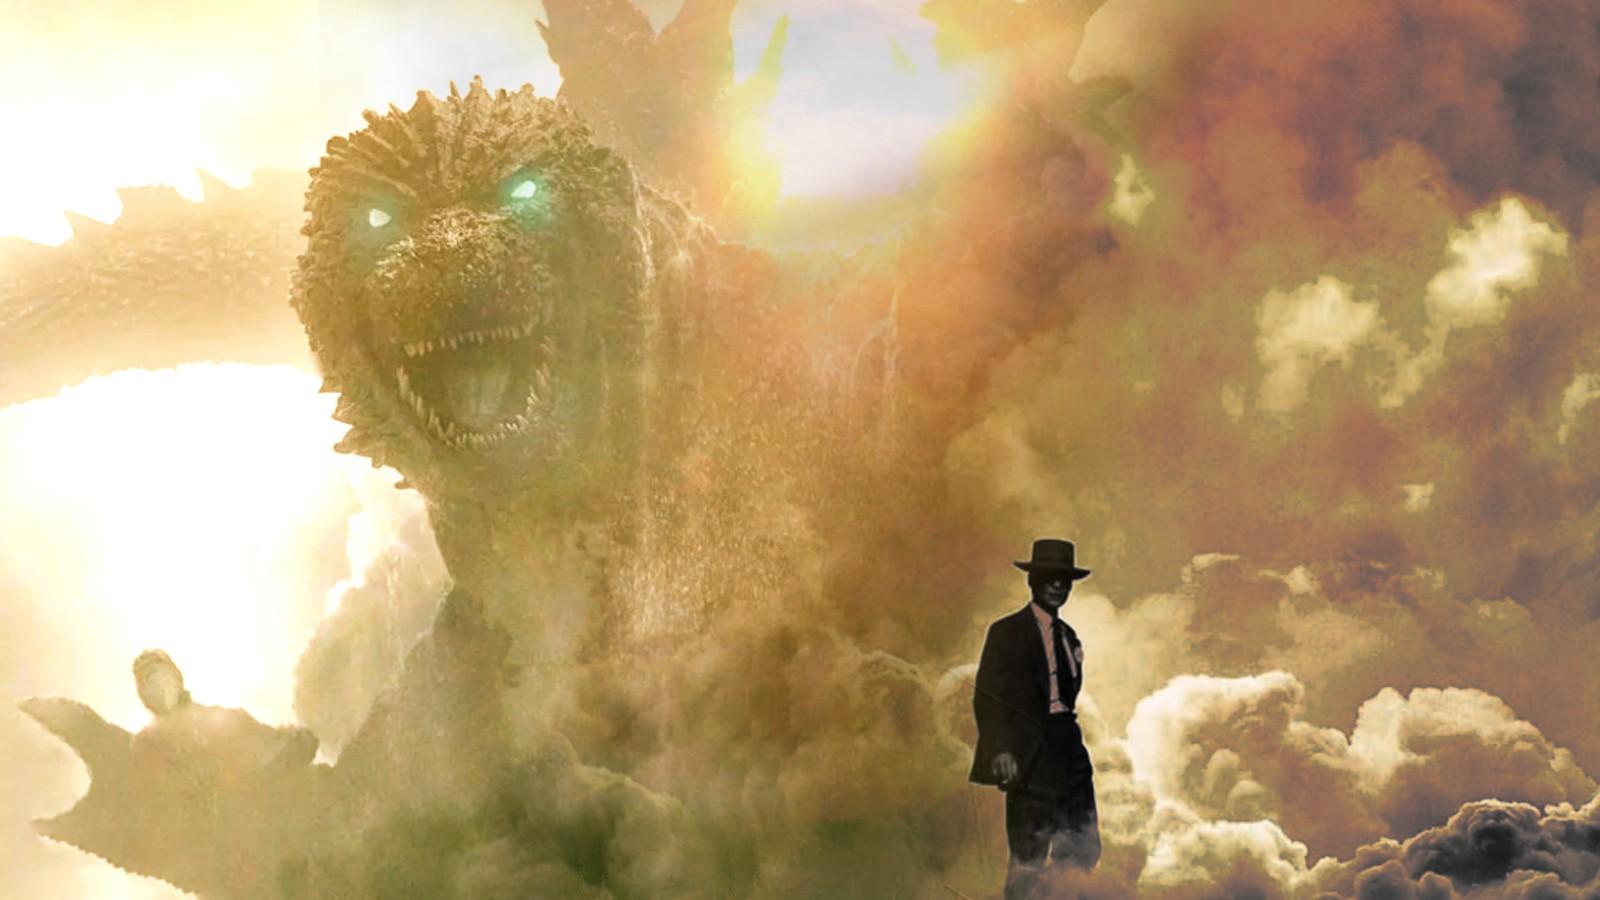 Posters for Godzilla Minus One and Oppenheimer combined